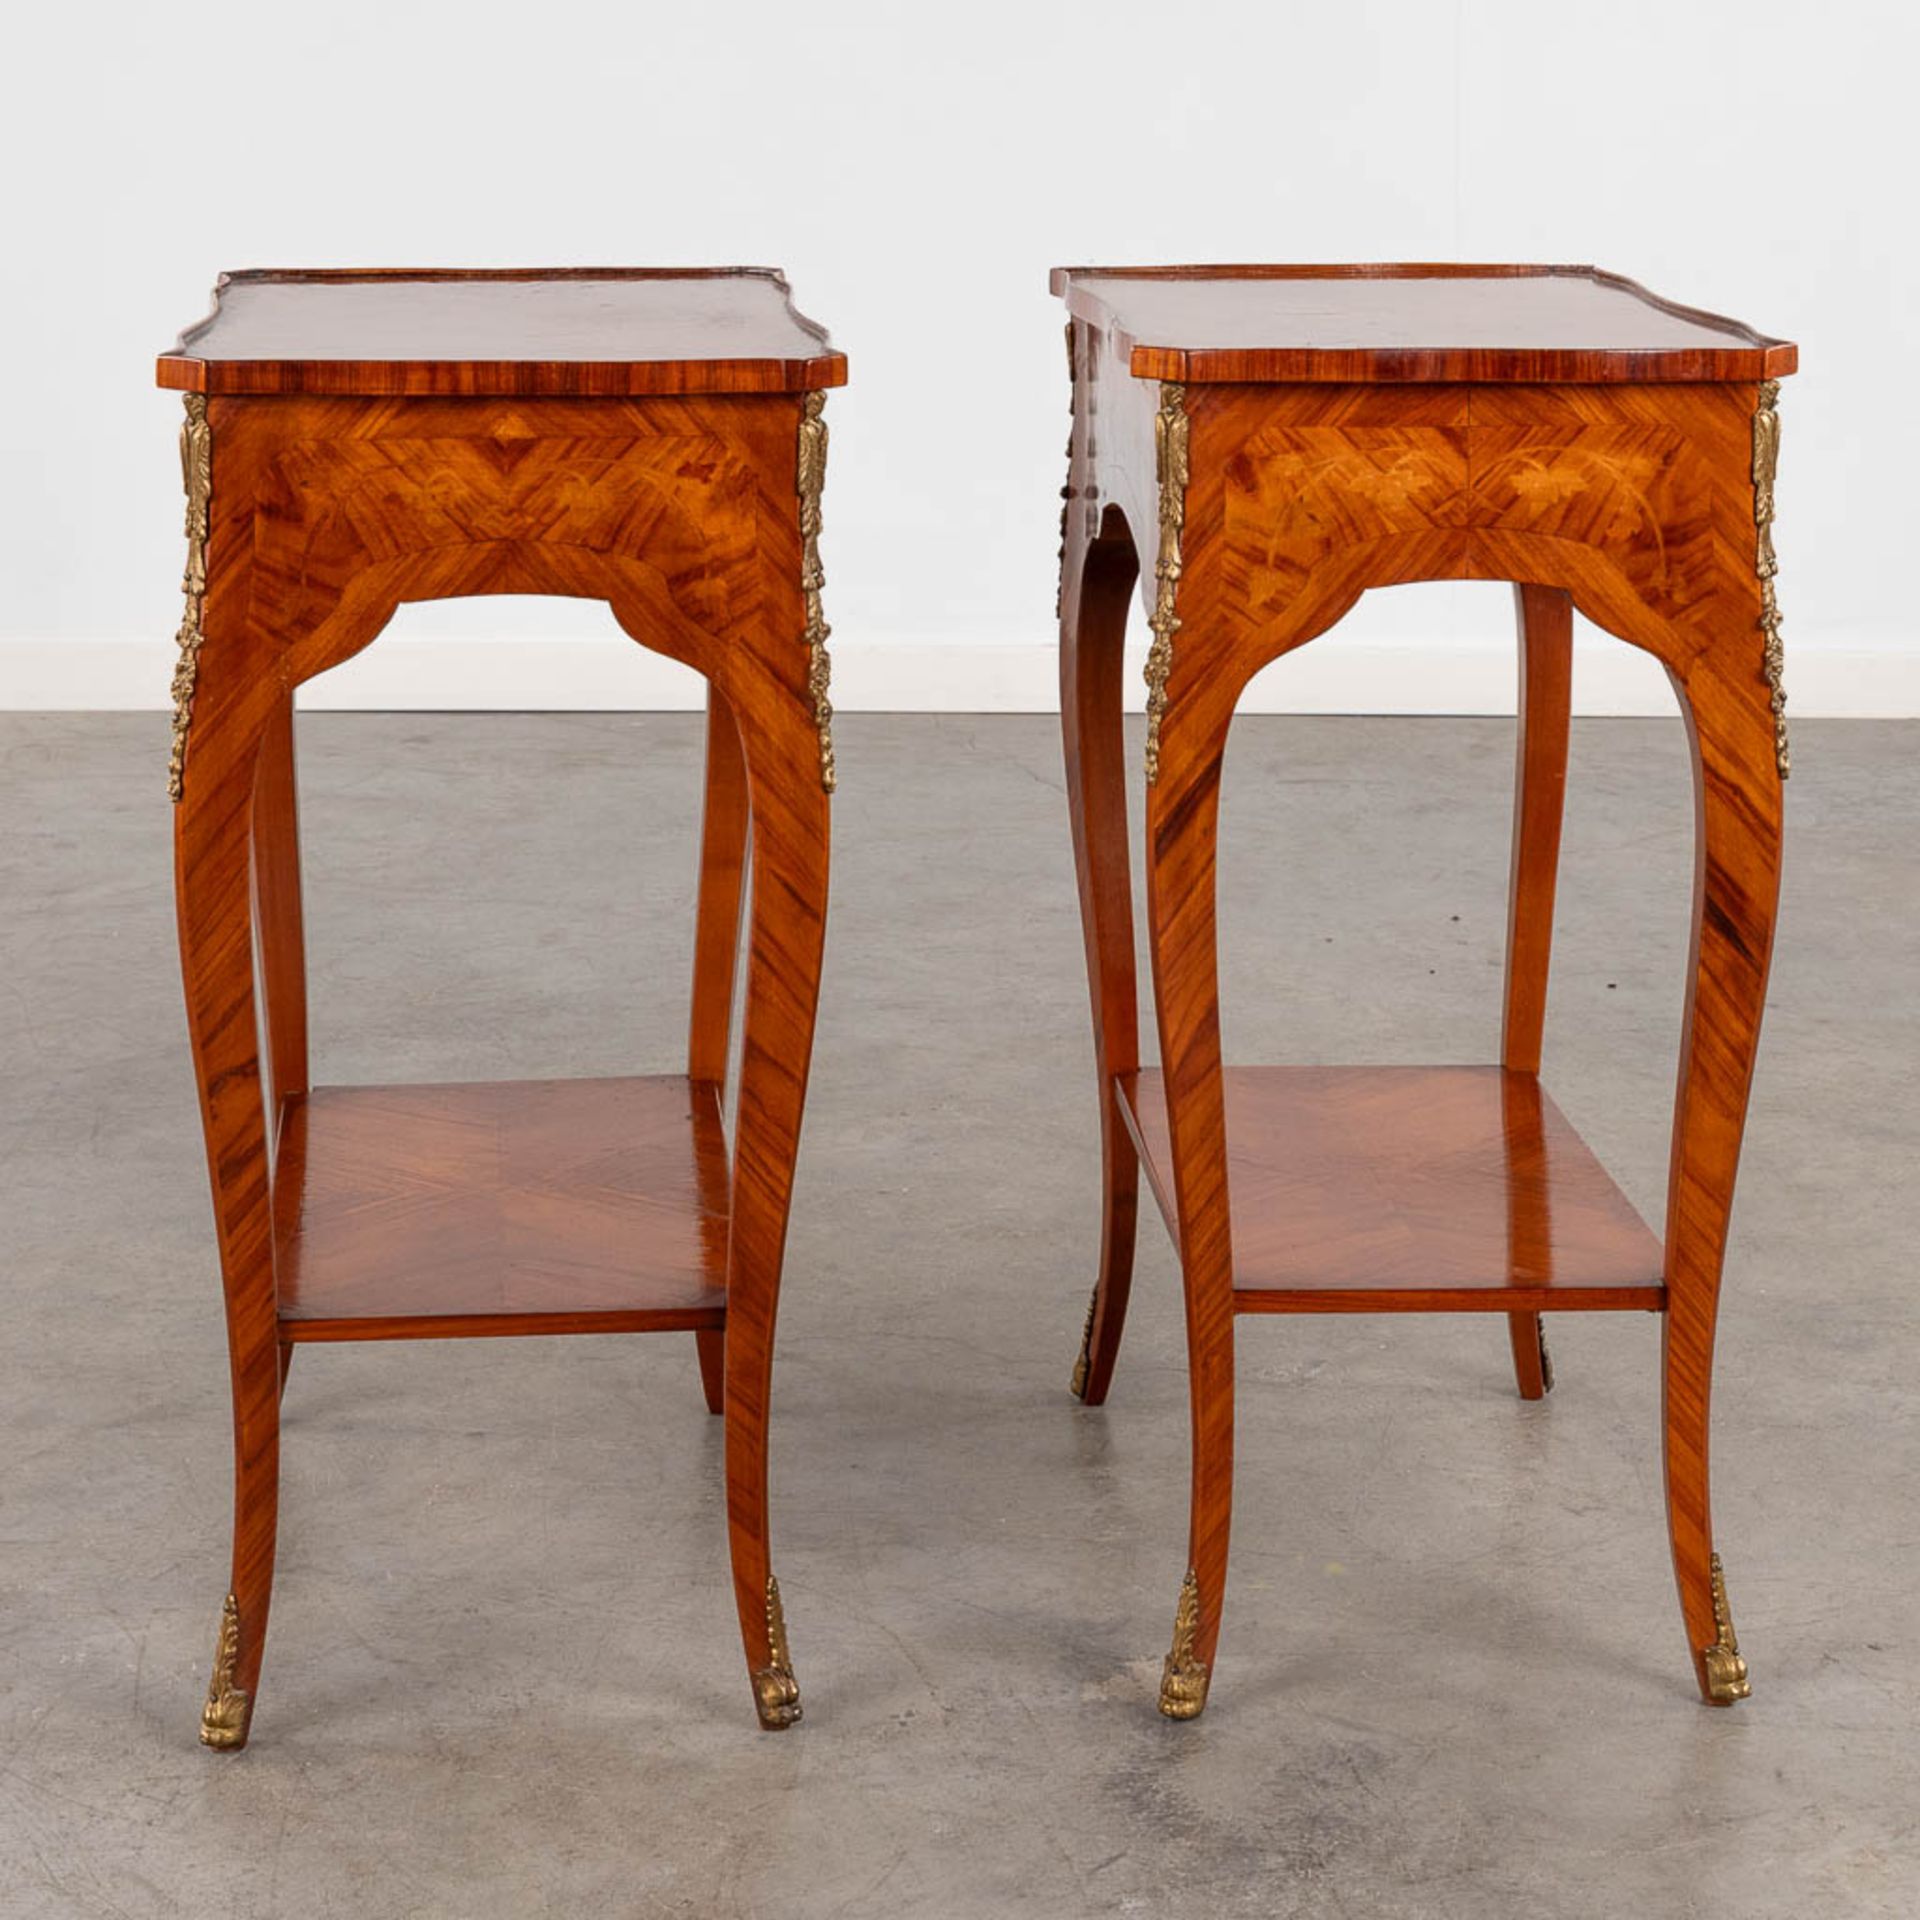 A pair of two-tier side tables with a drawer, wood with marquetry inlay. 20th C. (D:30 x W:45 x H:63 - Image 7 of 14